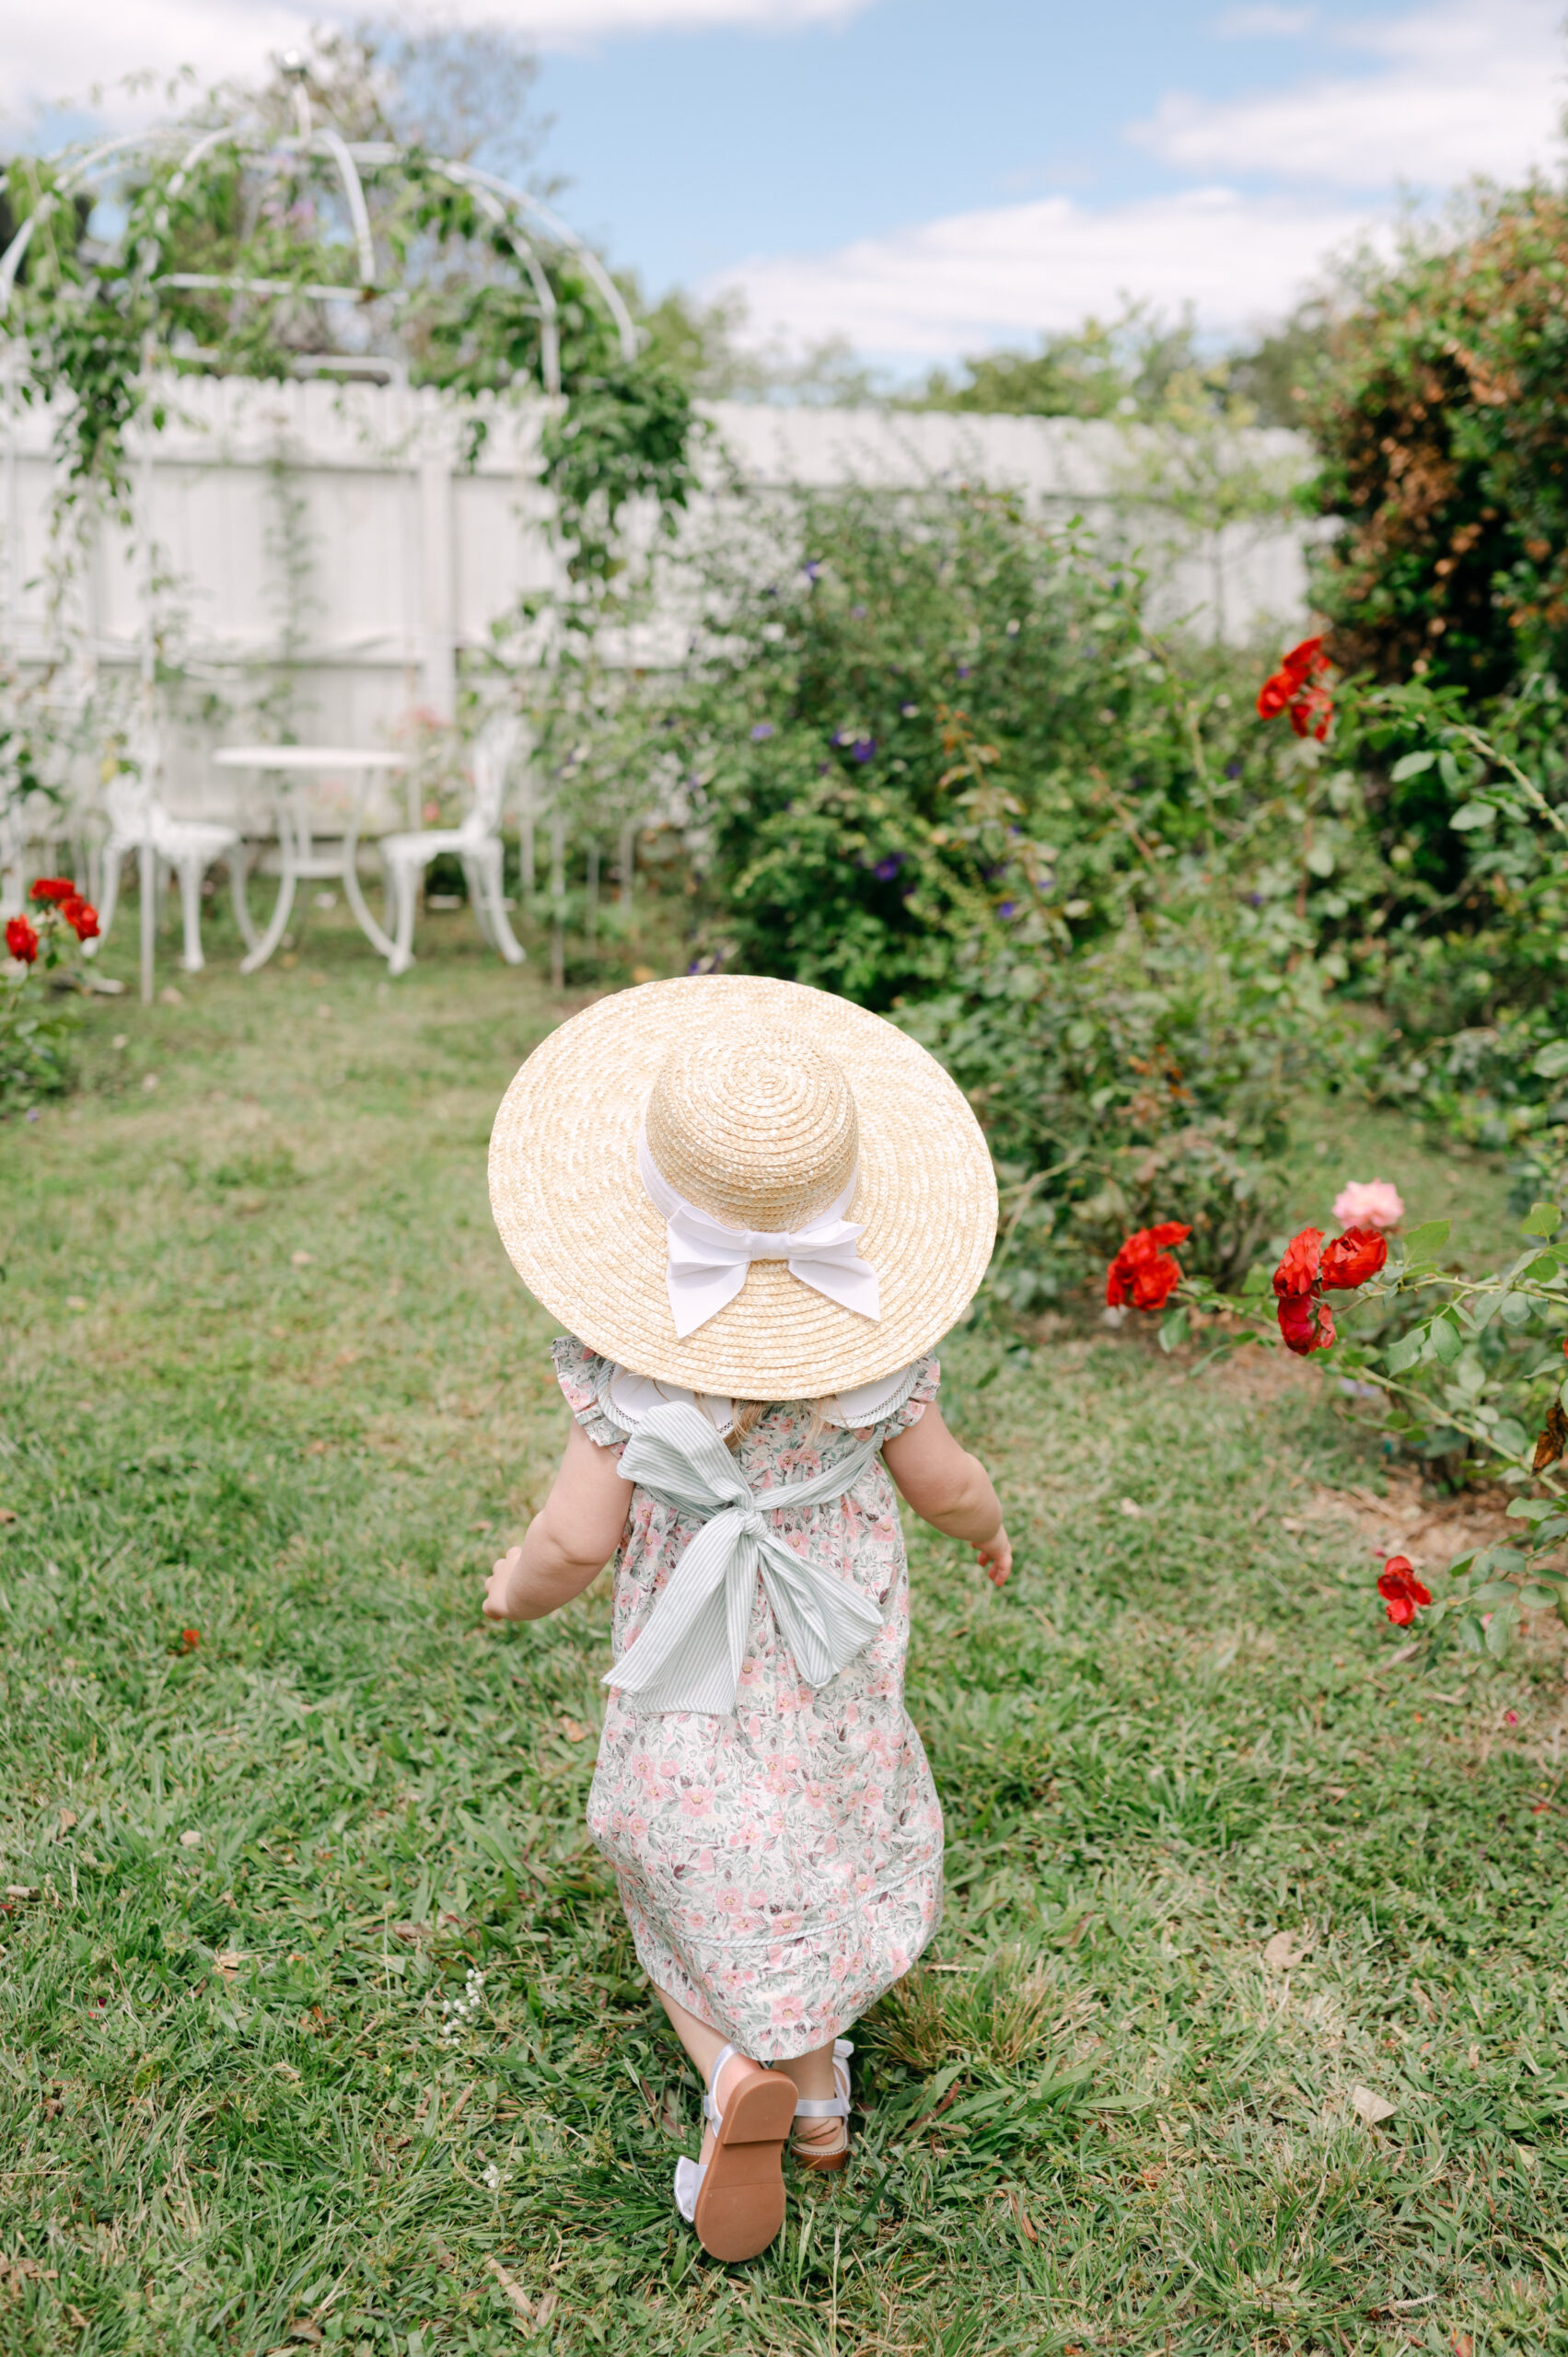 Little girl with summer hat running in a garden with roses